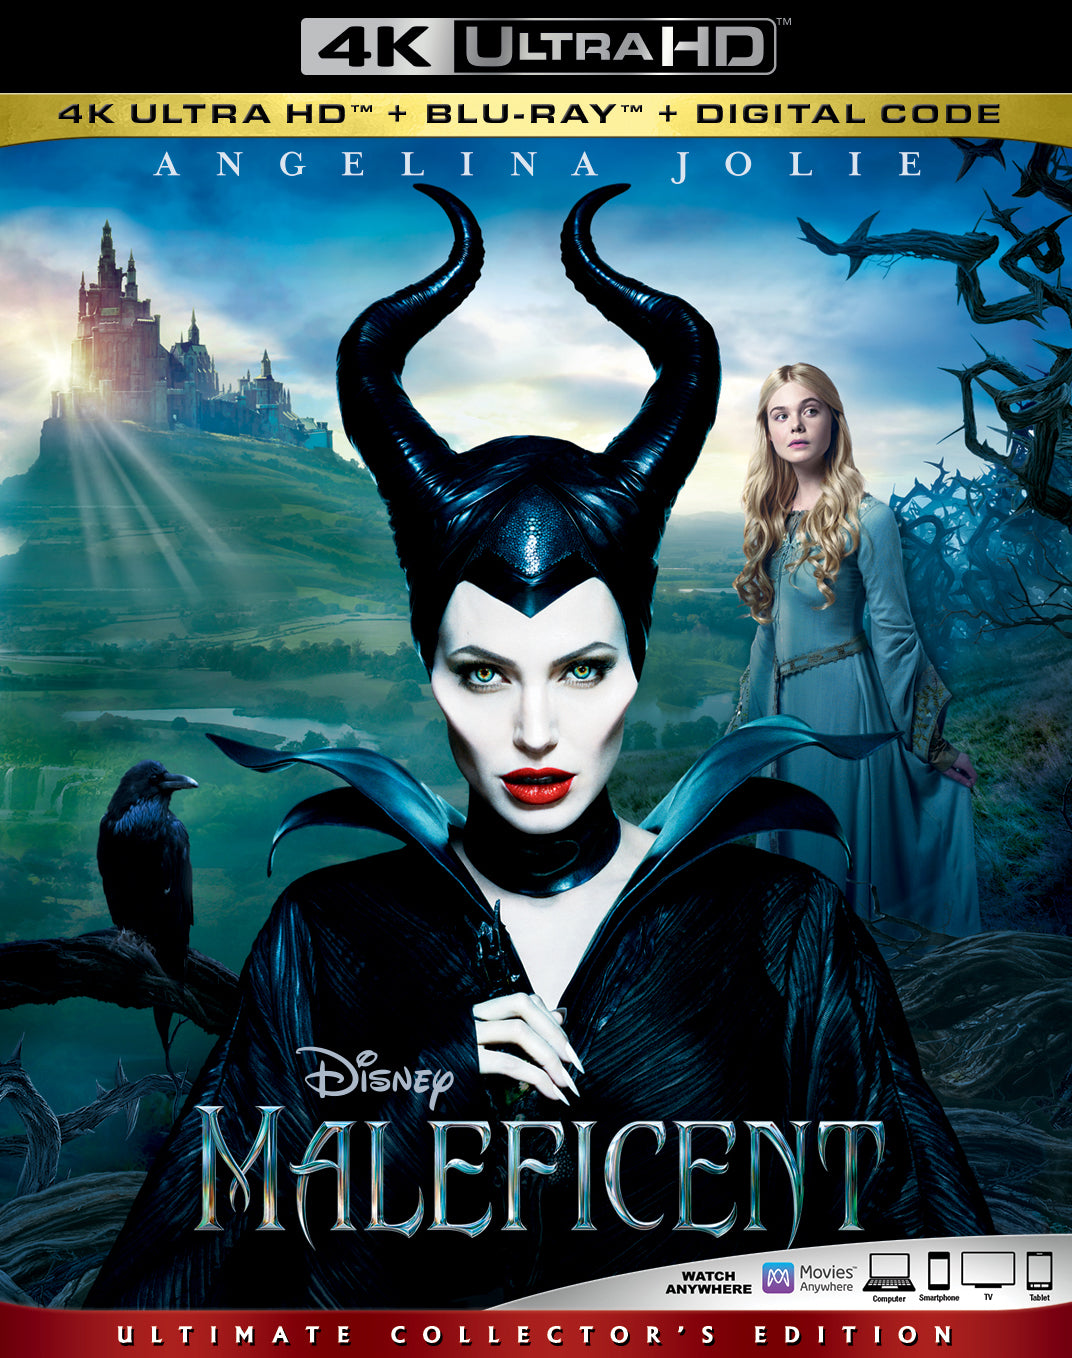 Maleficent (2014) Vudu or Movies Anywhere 4K redemption only